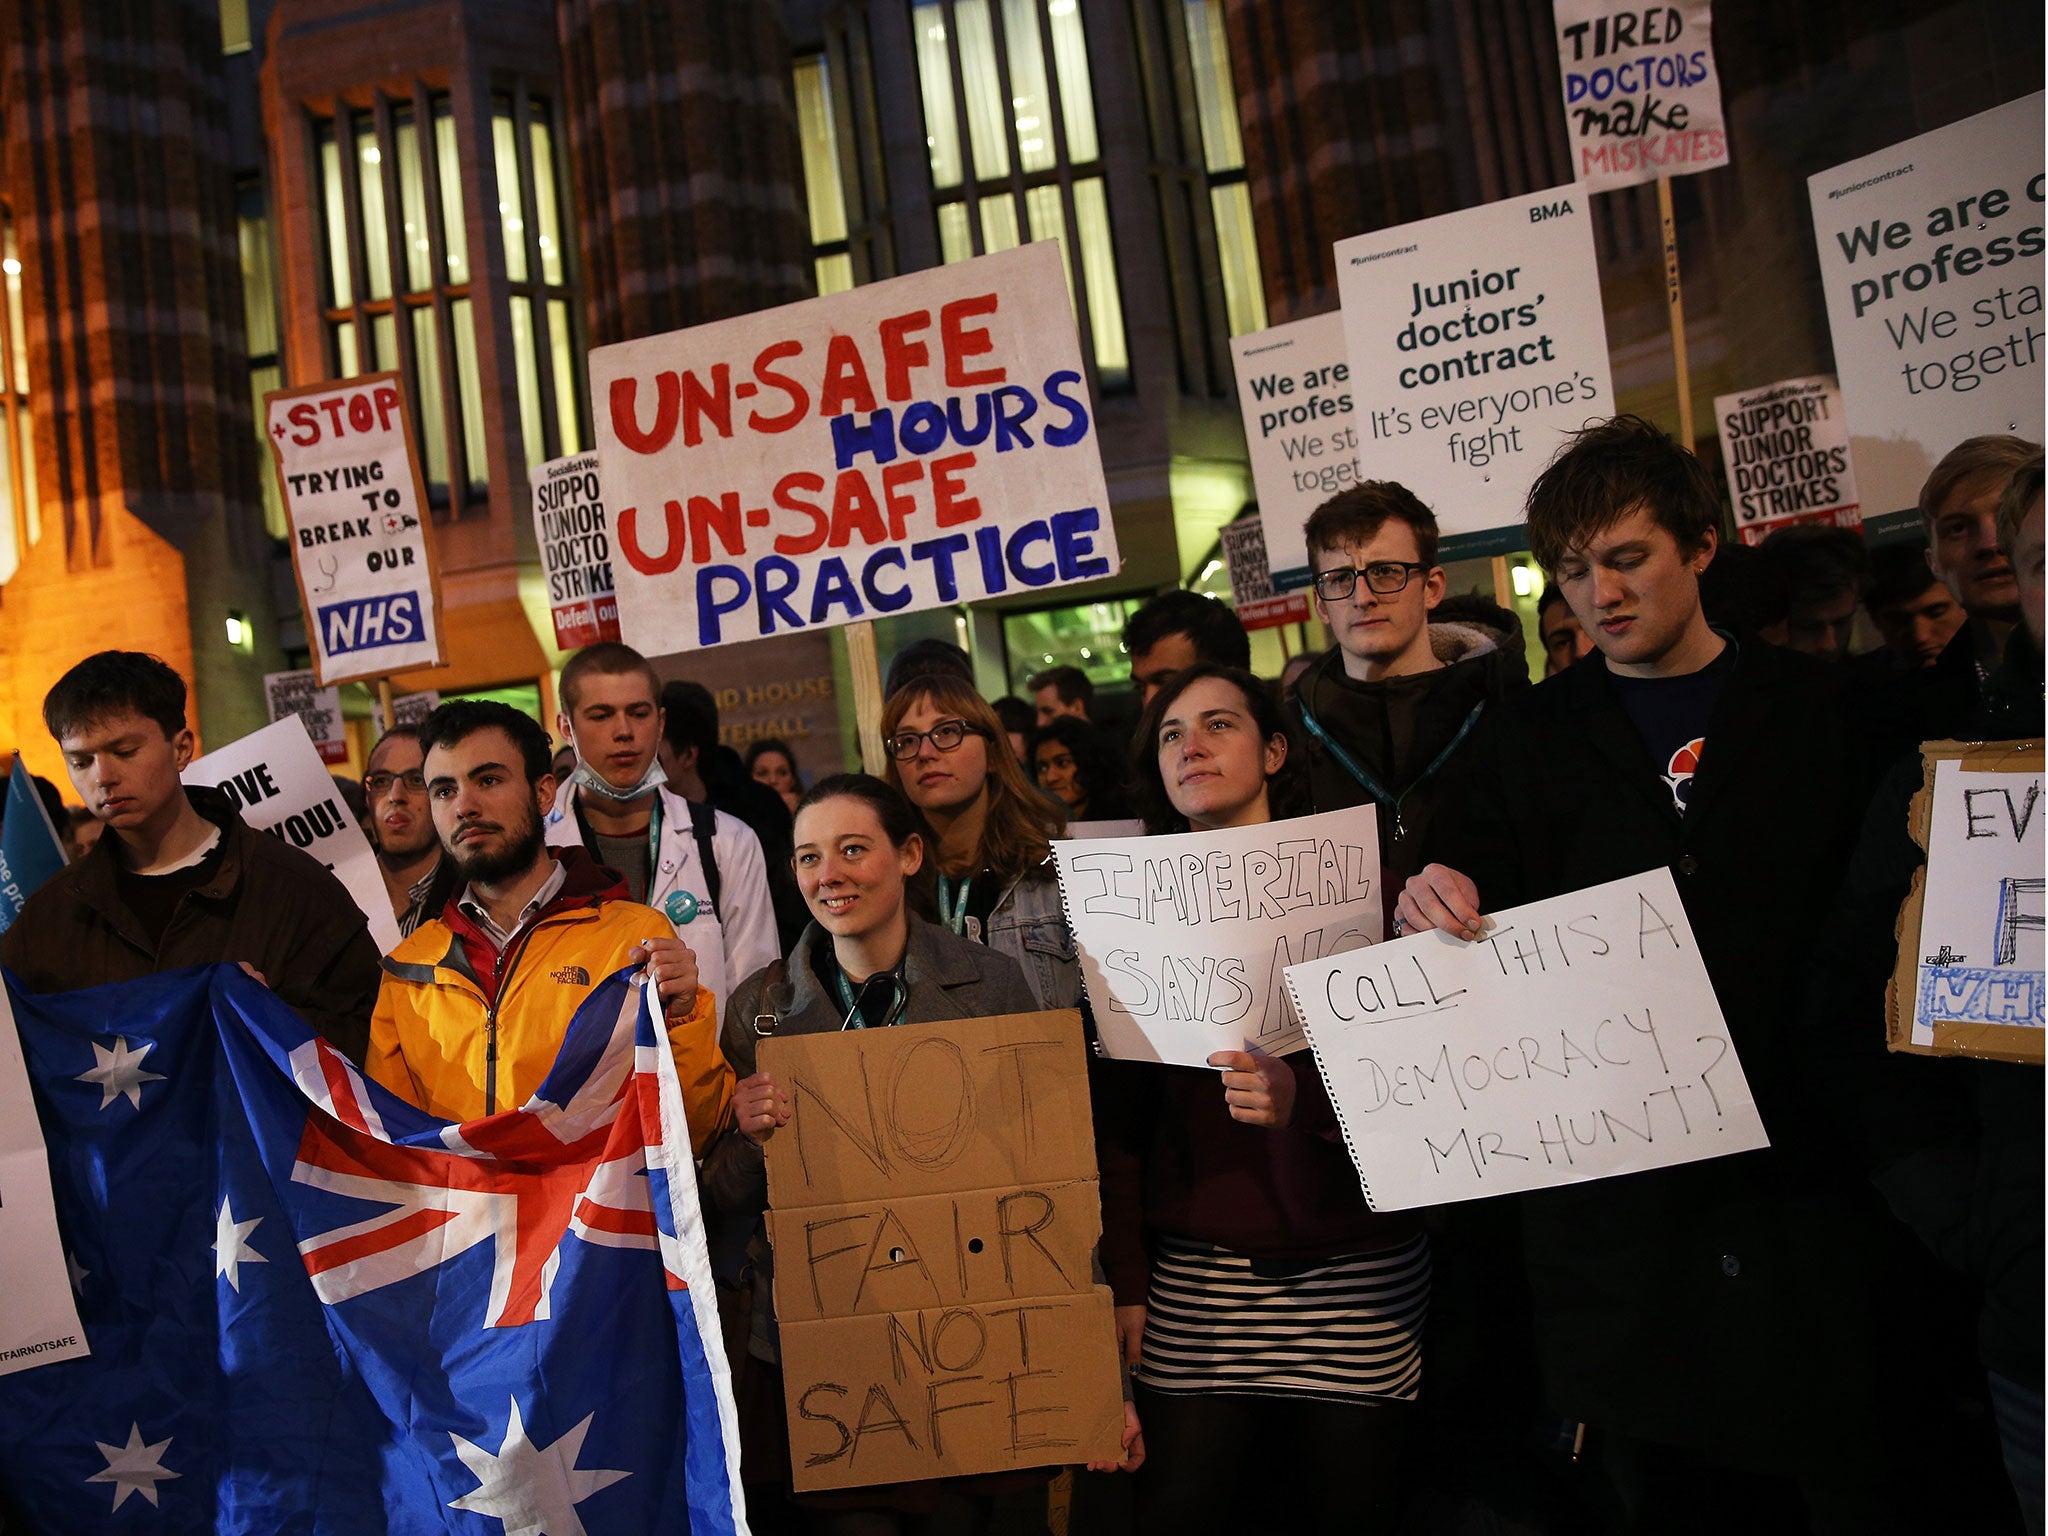 Junior Doctors protest outside the Department of Health at the Government's intention to impose new contracts on 11 February, 2016 in London, England